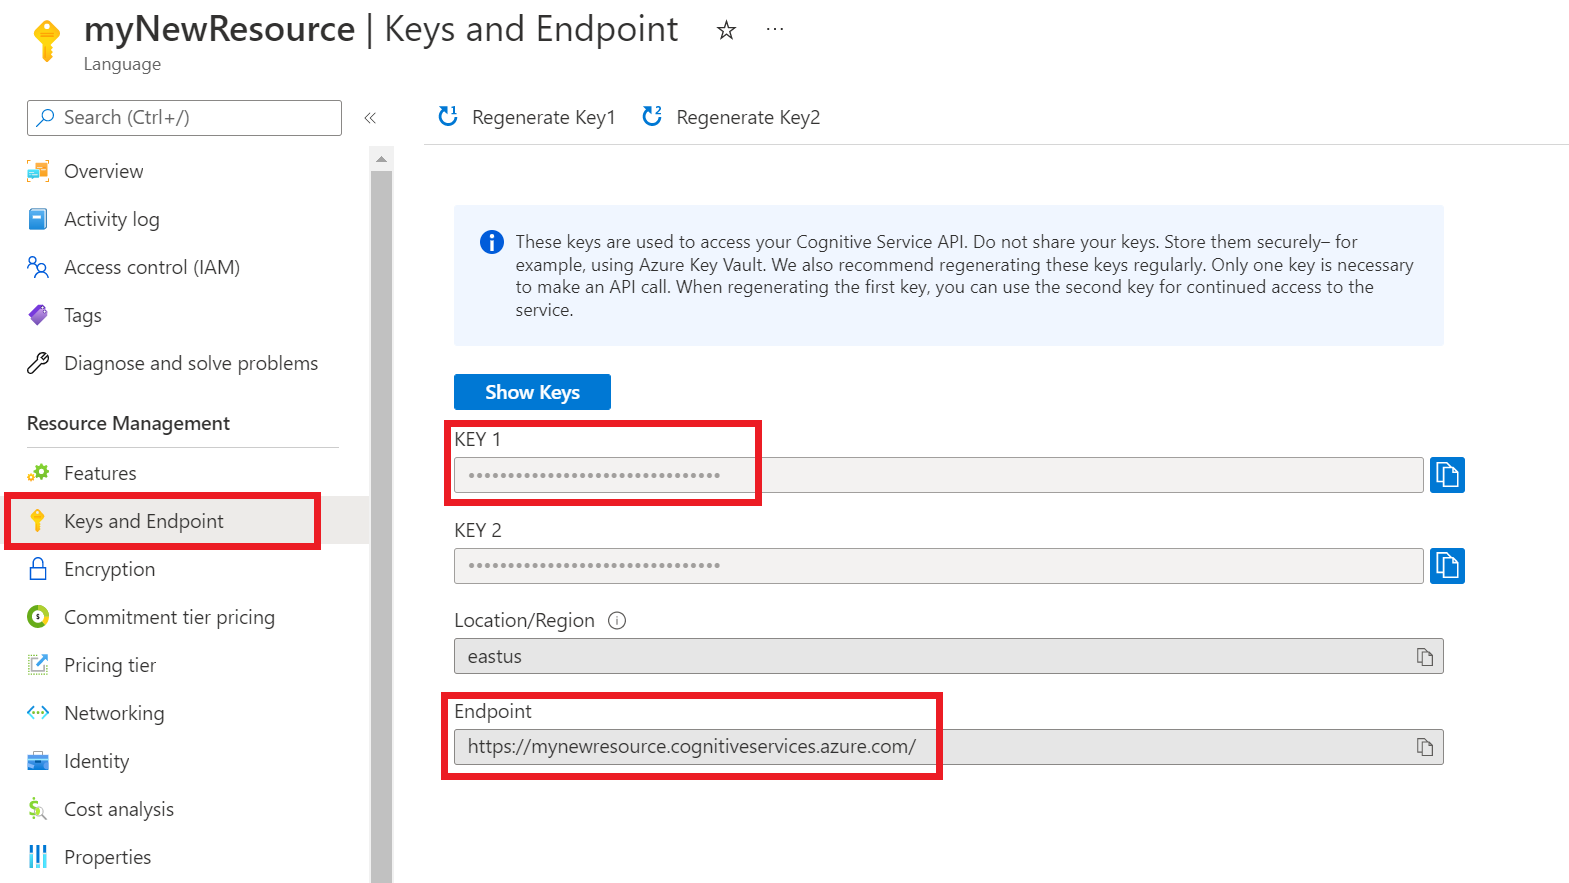 A screenshot showing the keys and endpoint section for a resource.